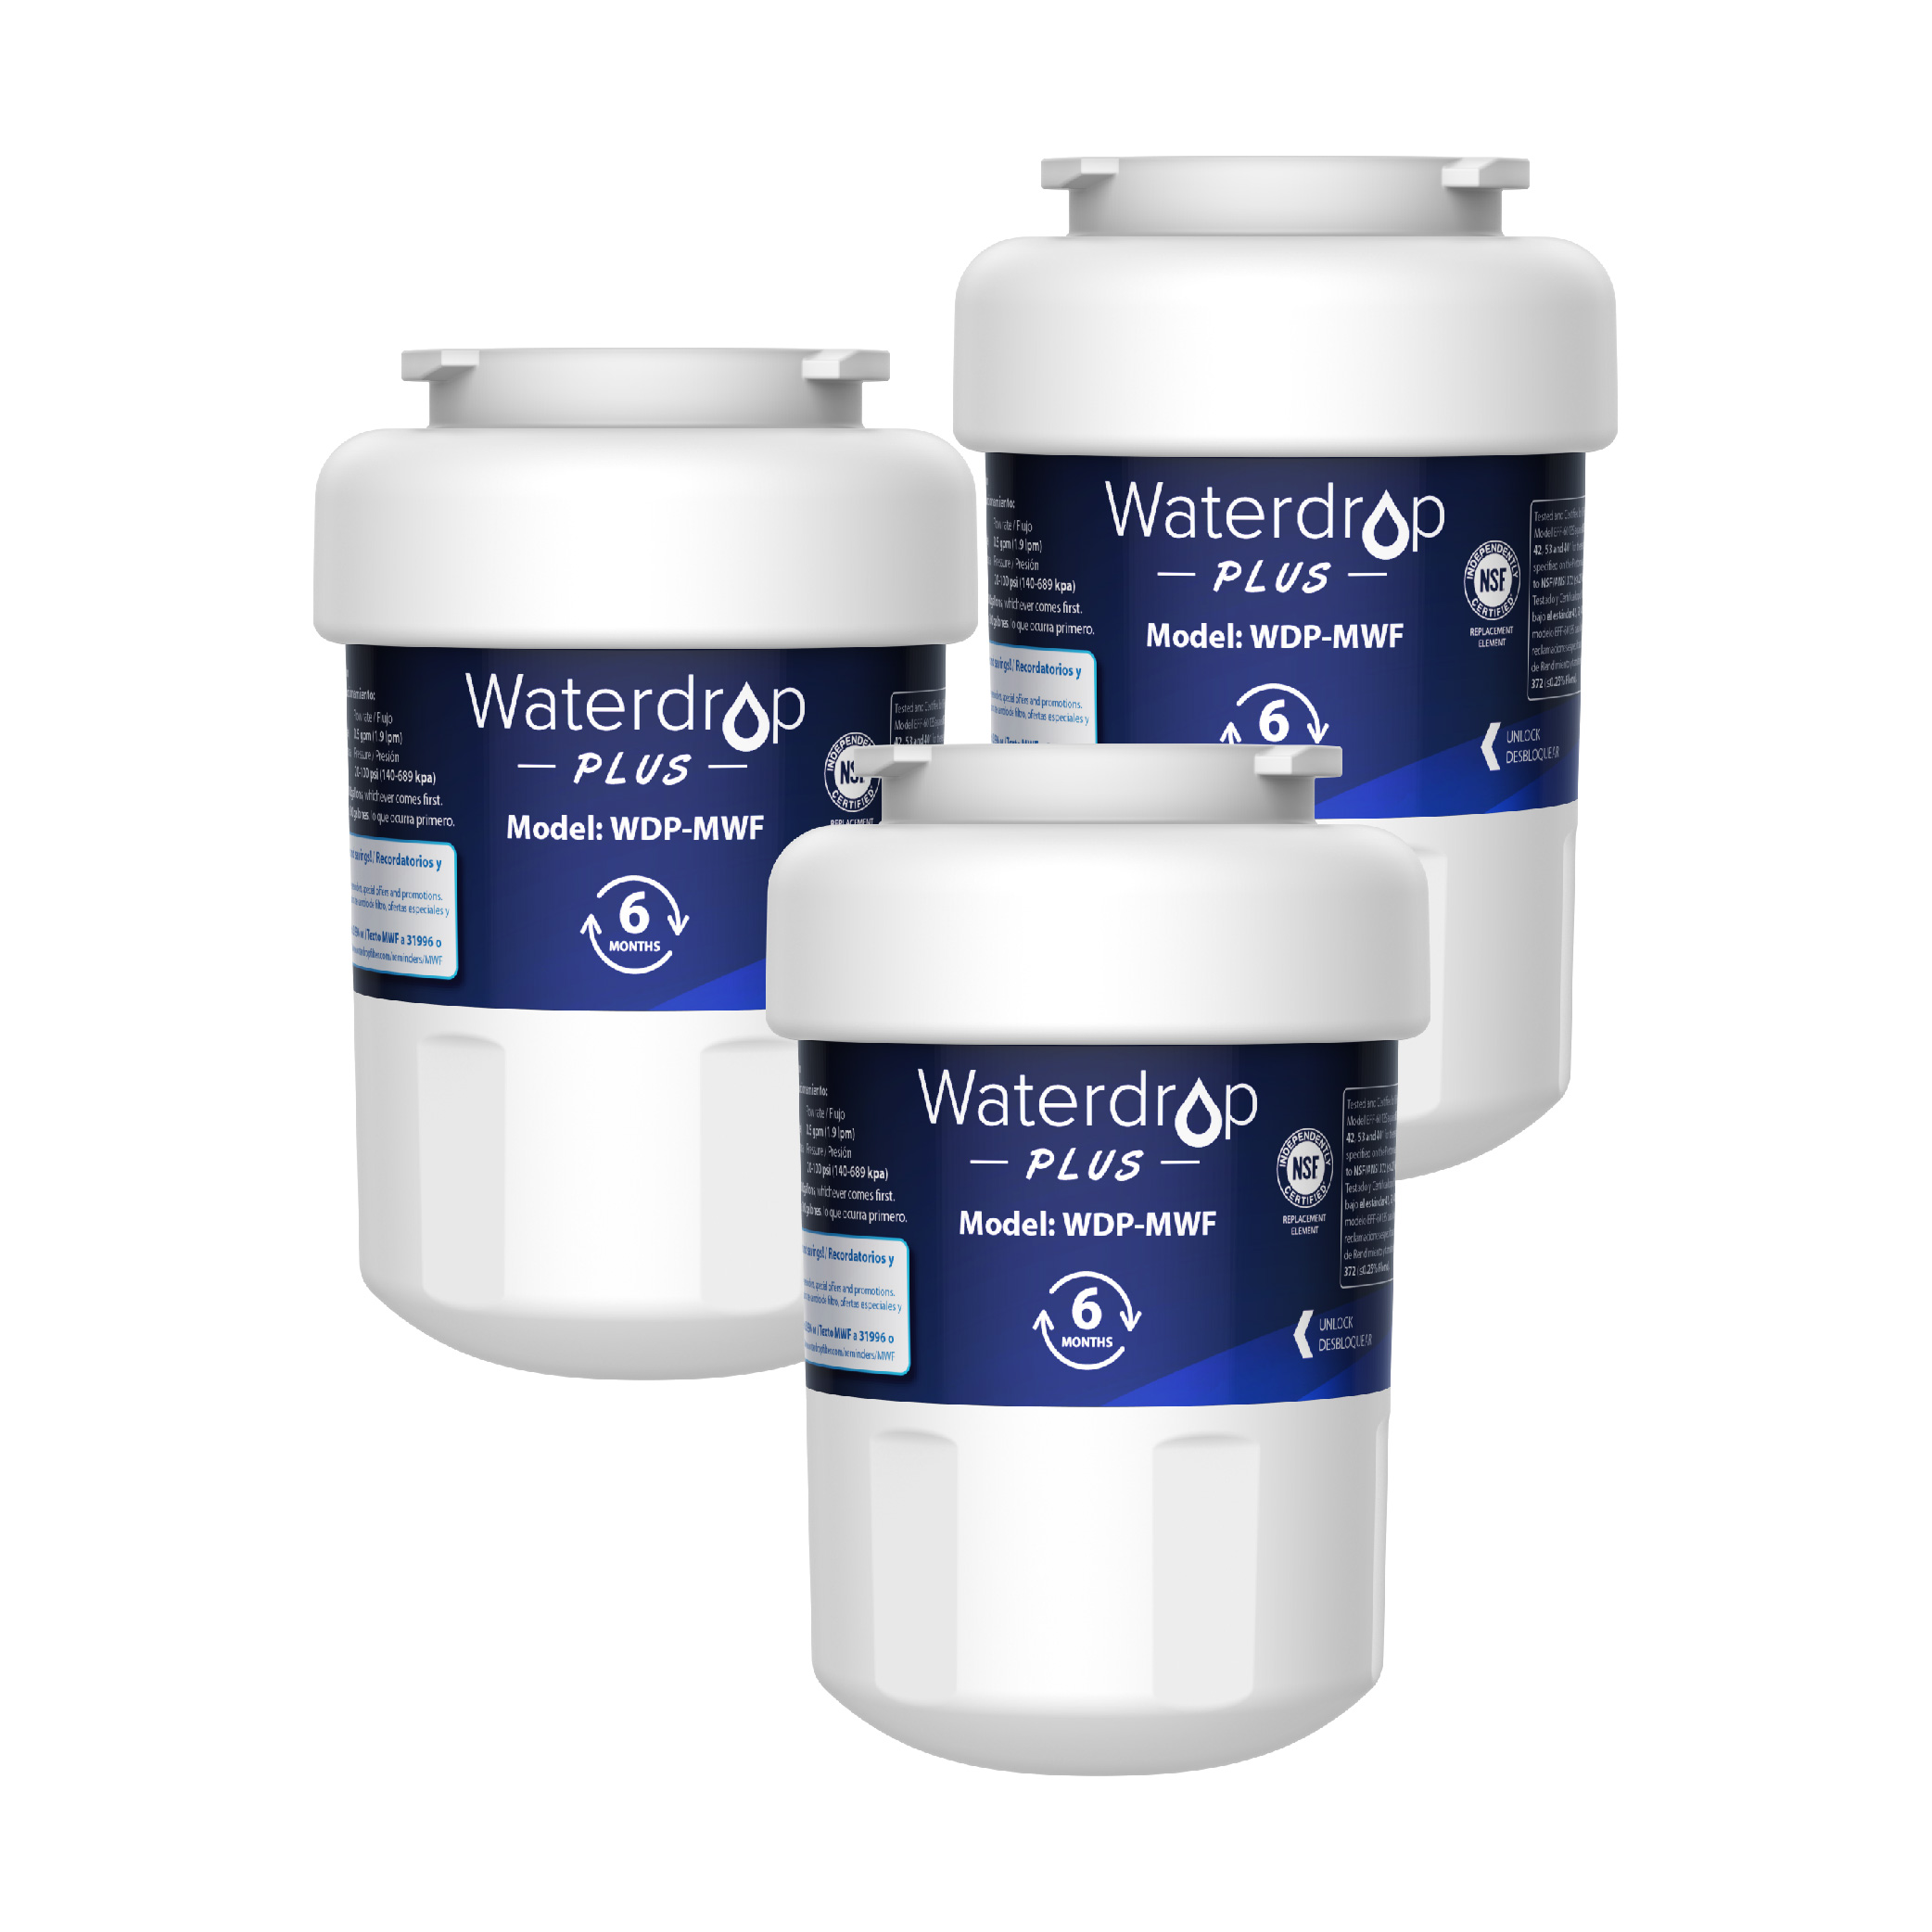 Waterdrop NSF 401&53&42 Certified Refrigerator Water Filter, Replacement for GE® MWF, MWFP, MWFA, GWF, GWFA, SmartWater, Kenmore 9991, 46-9991, 469991, 3 Pack - image 1 of 6